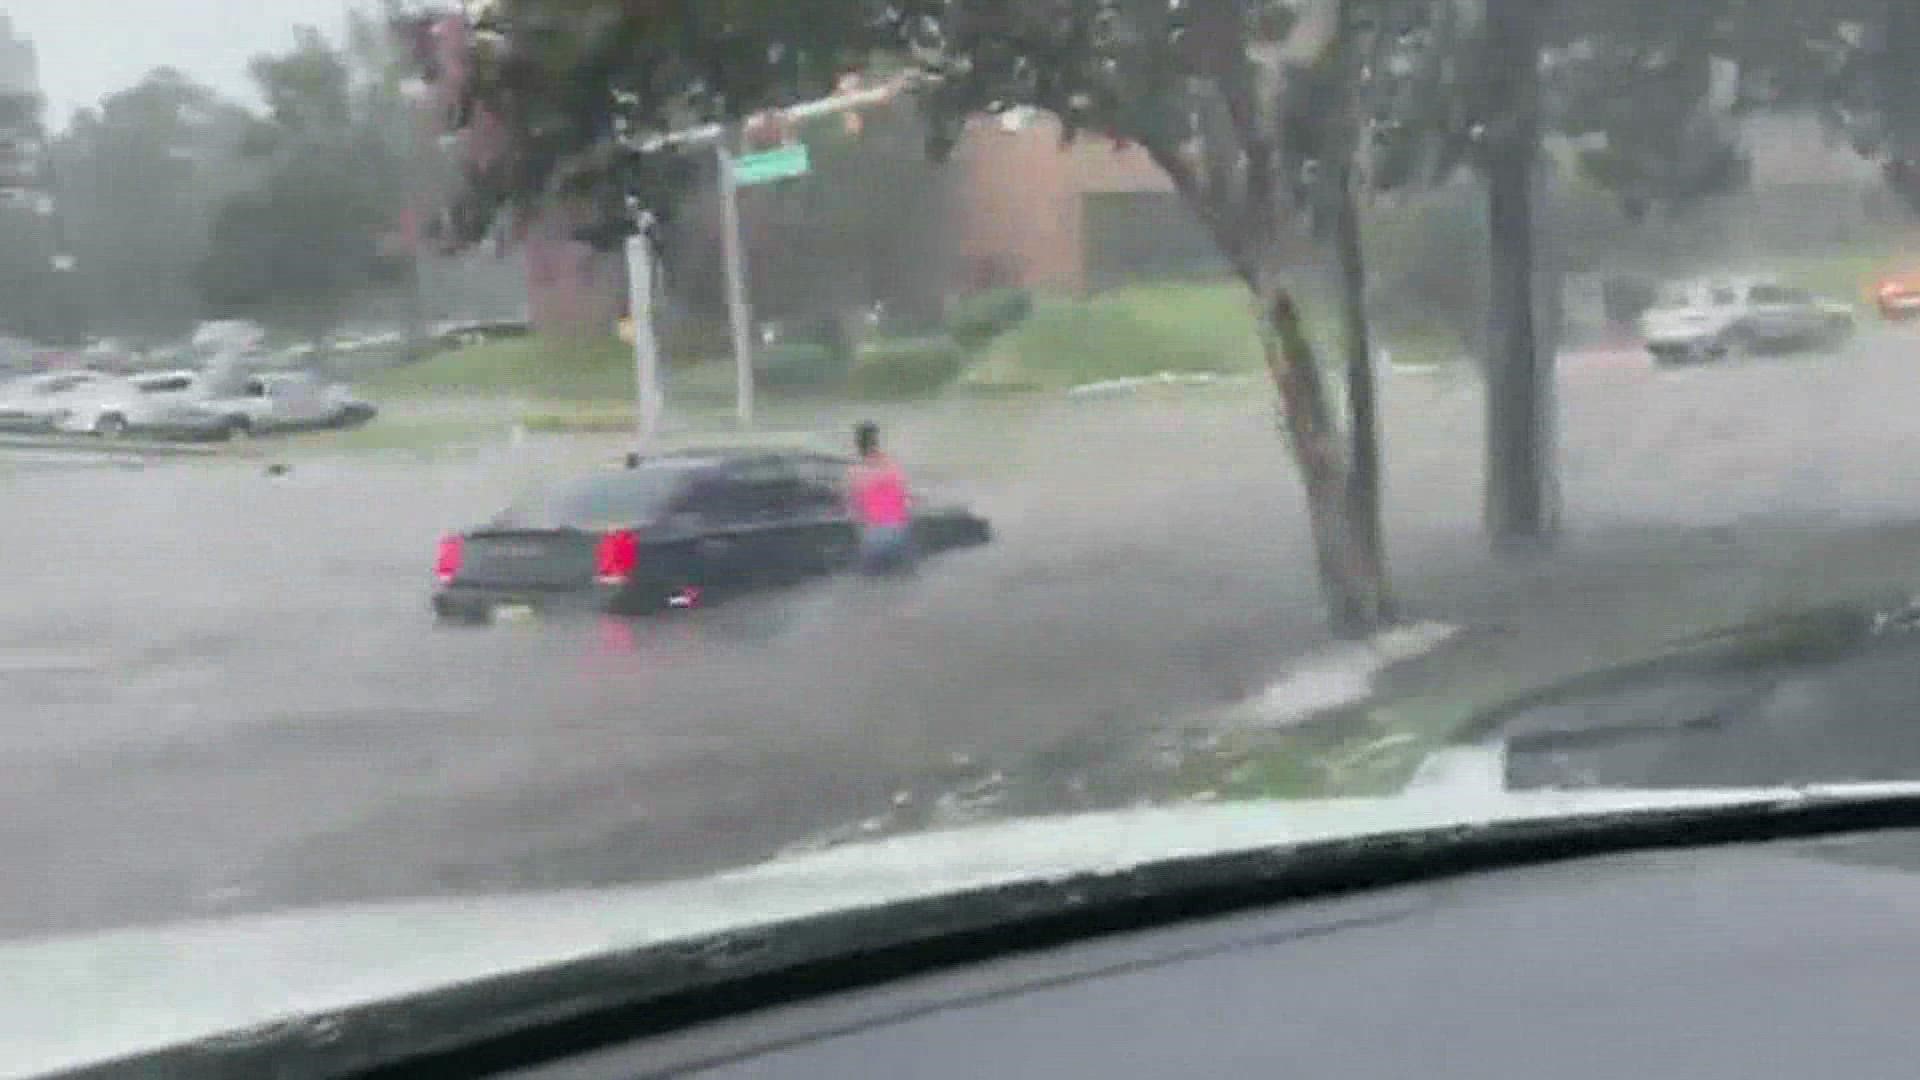 Thanks to viewer Jack Conway for this video of flash flooding along Poplar Avenue near Massey in Memphis.